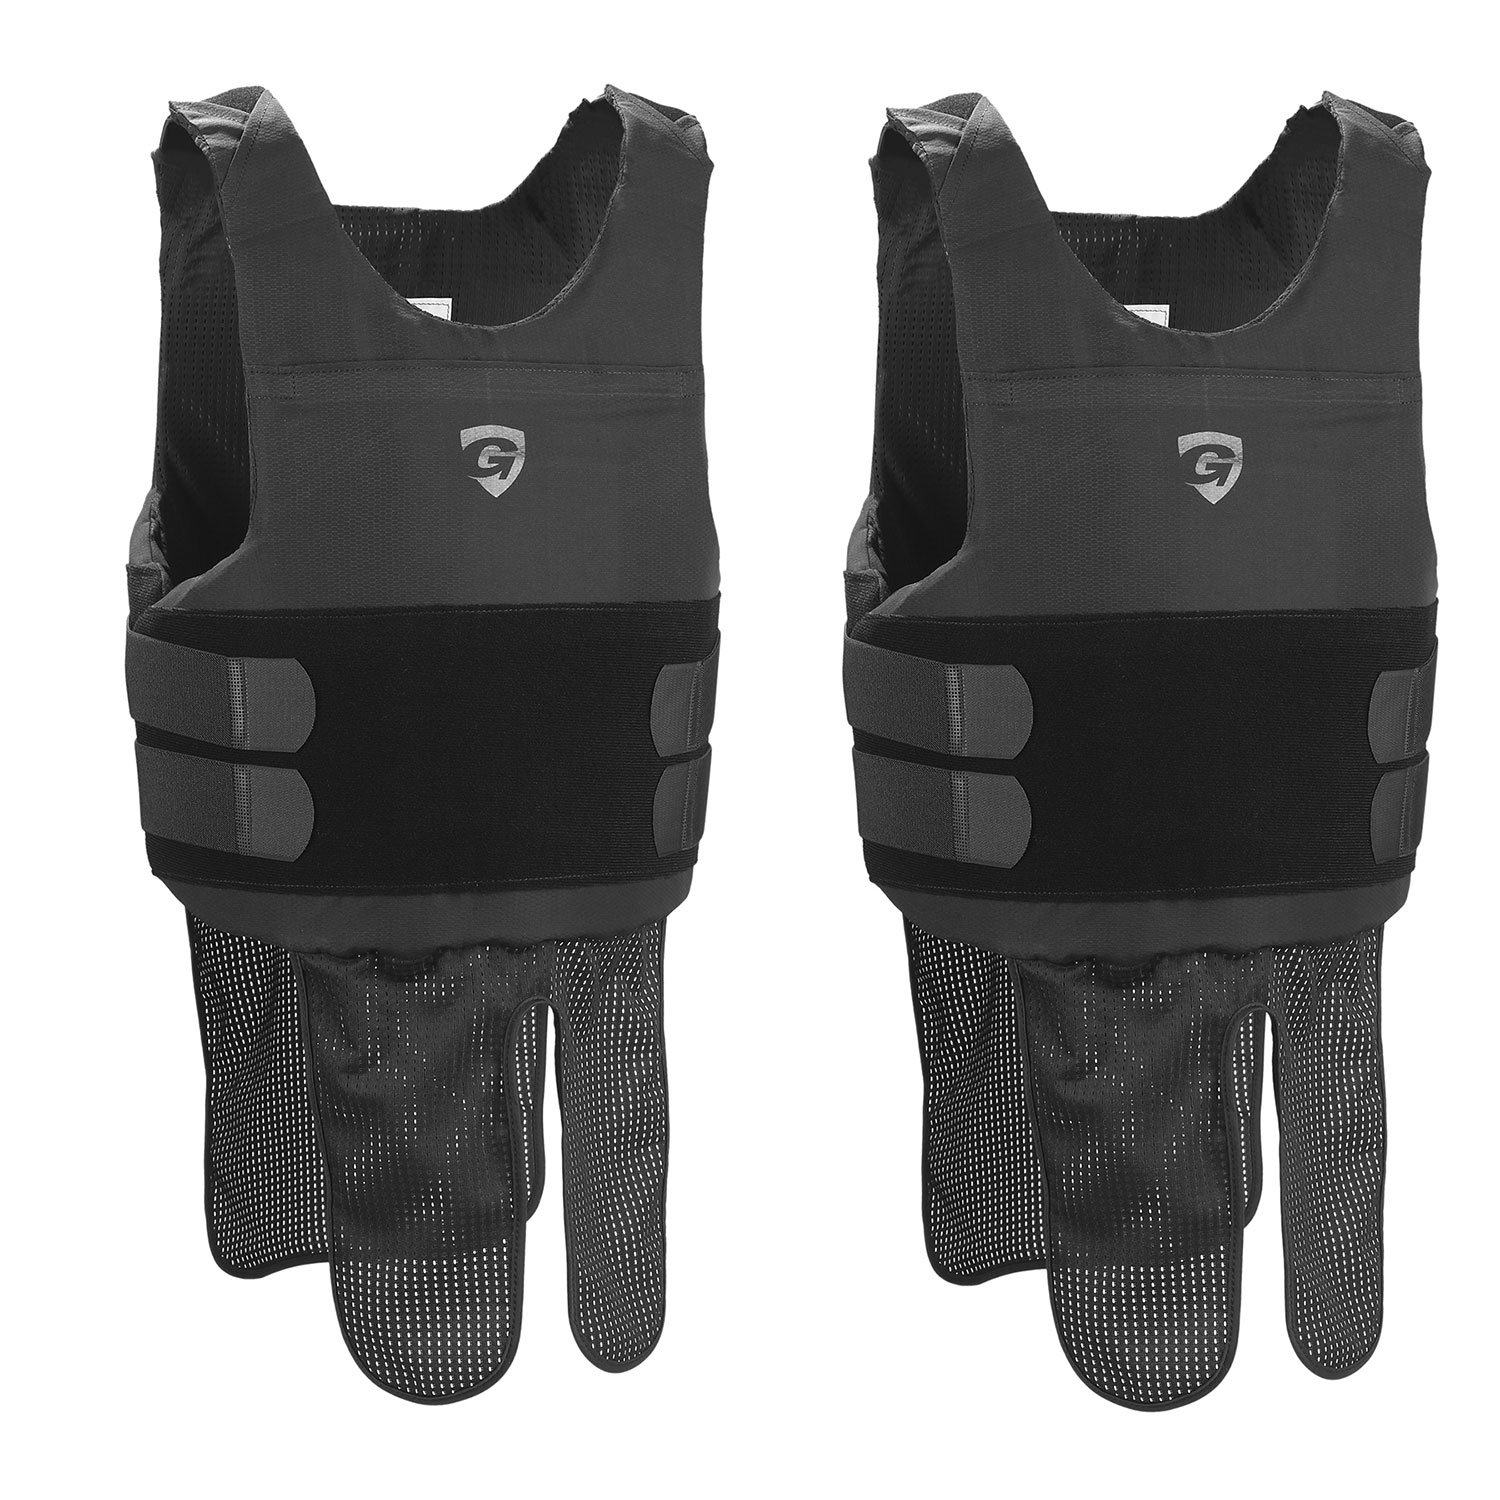 GALLS G FORCE LEVEL II CONCEALABLE BODY ARMOR W 2 CARRIERS